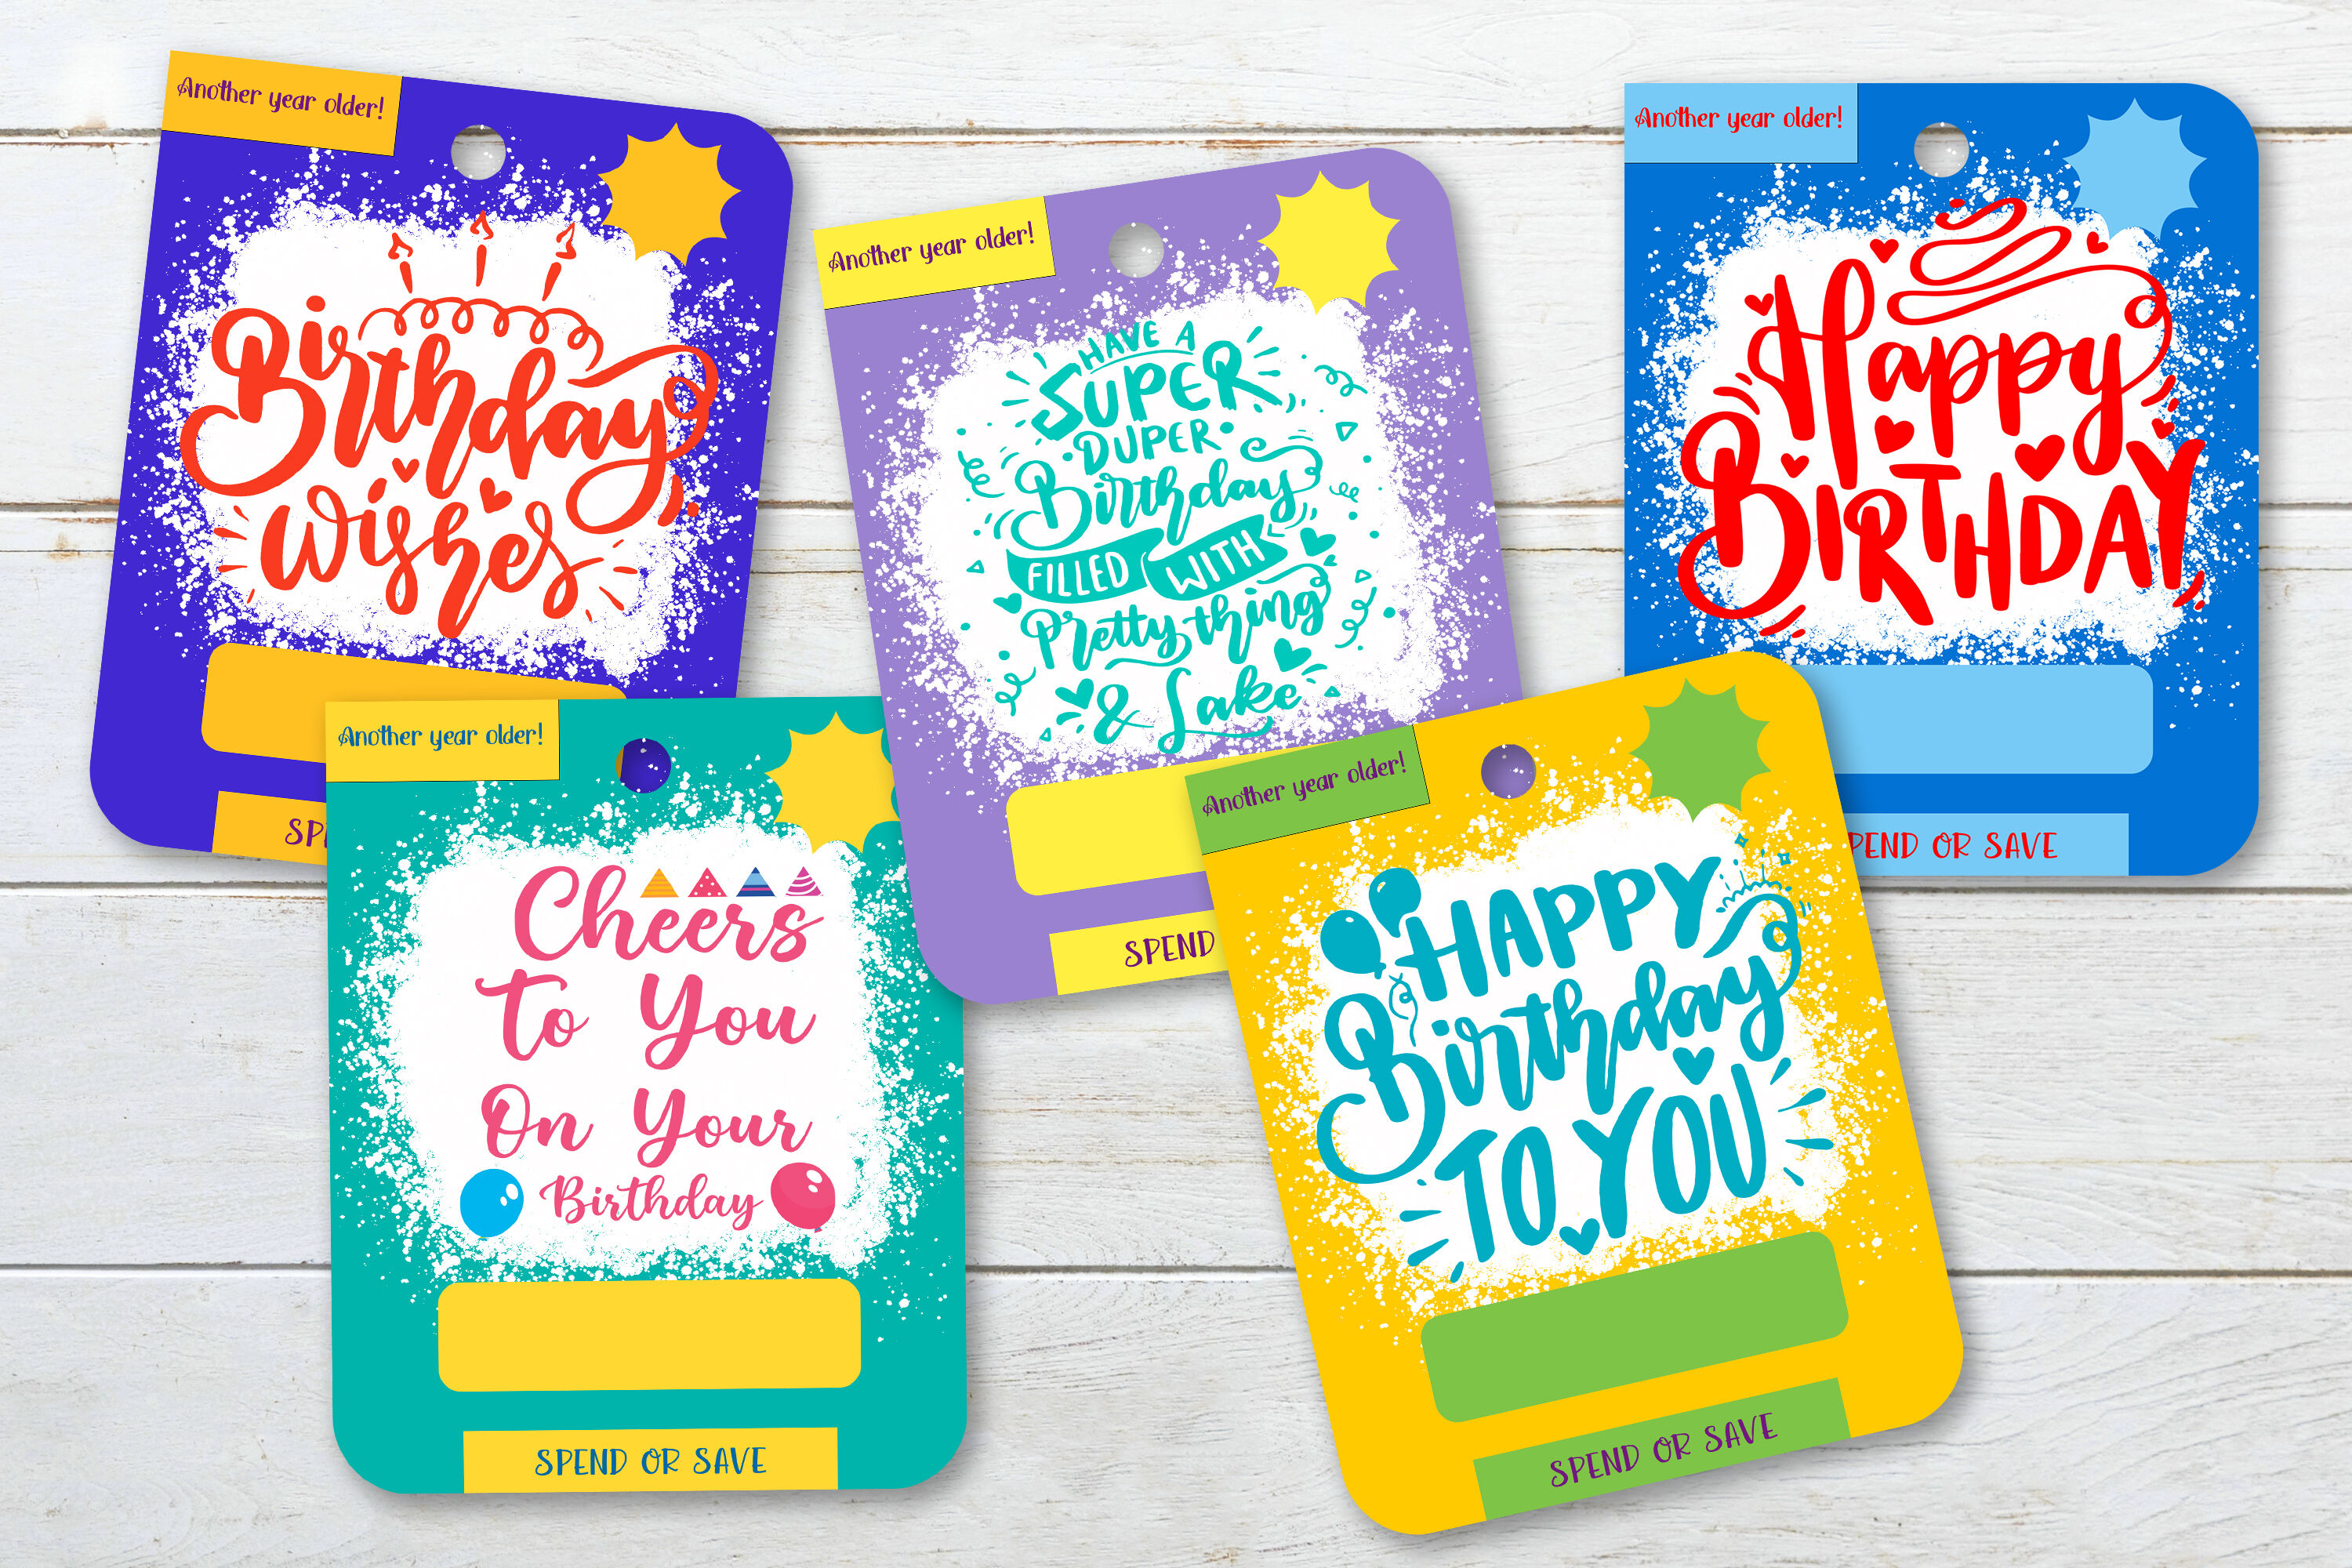 Happy Birthday Money Card PNG 10 Designs Printable gift card By ...